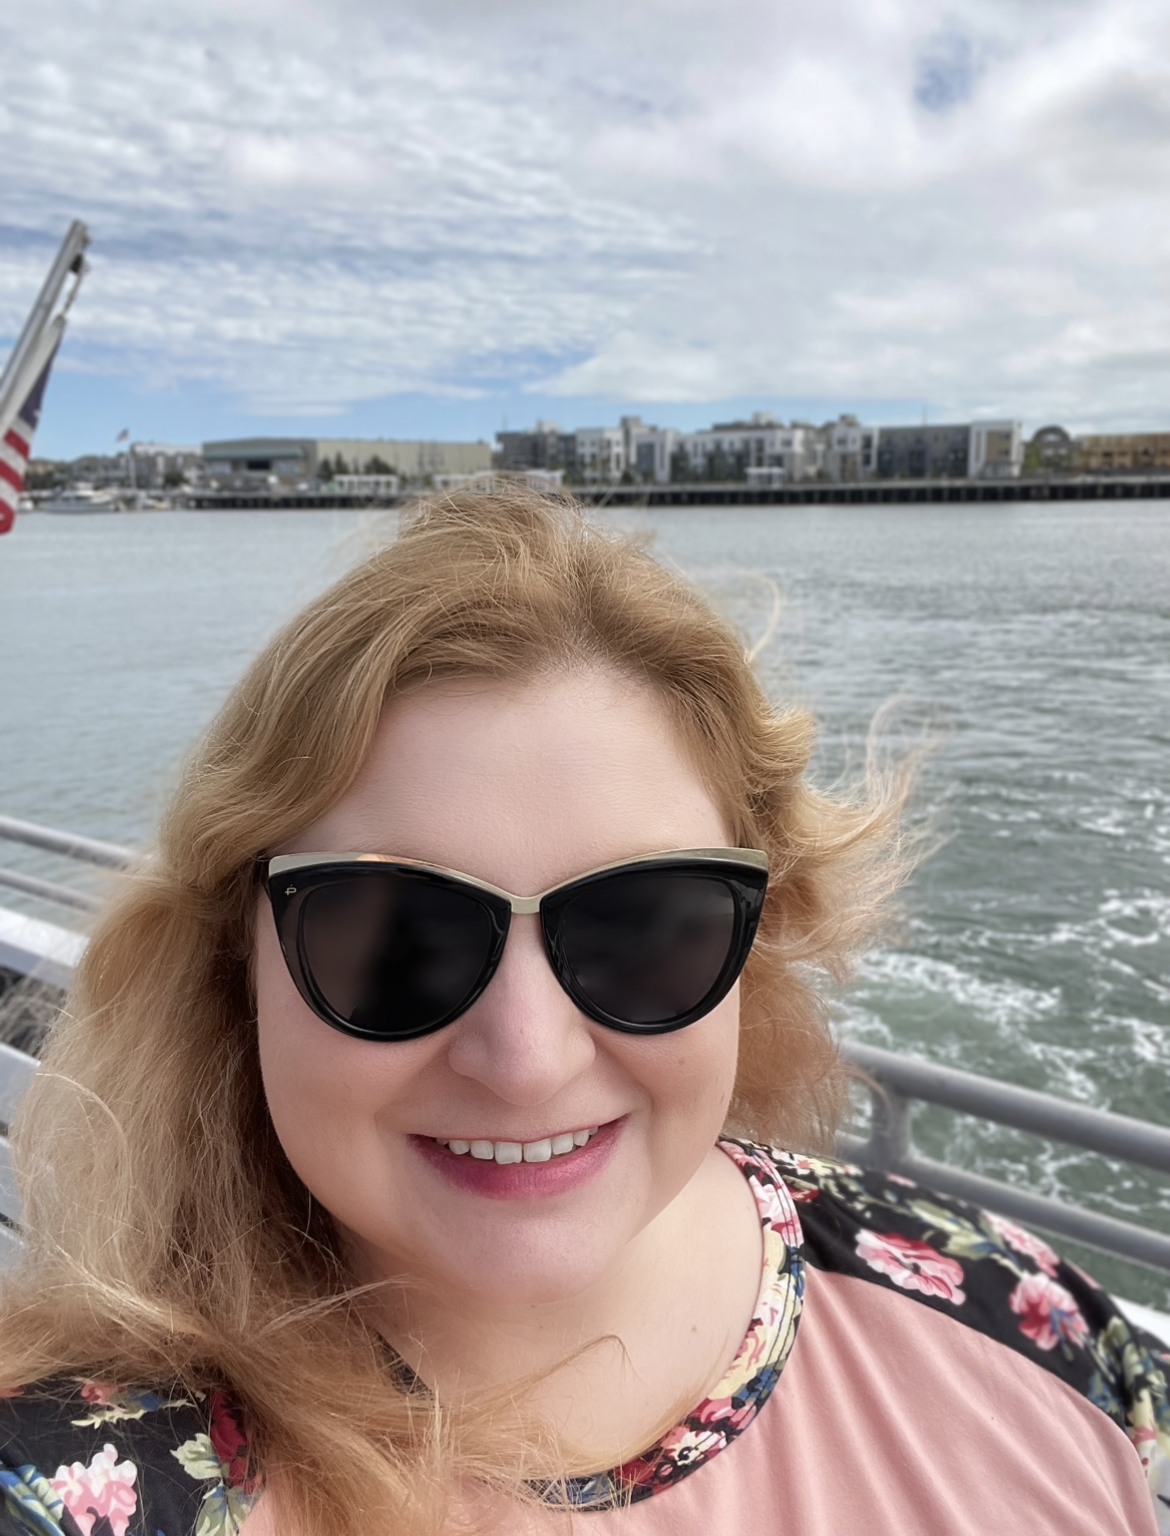 Katie, a white person with gingery hair, is wearing sunglesses and appears to be on a boat, out on the water on a sunny day.